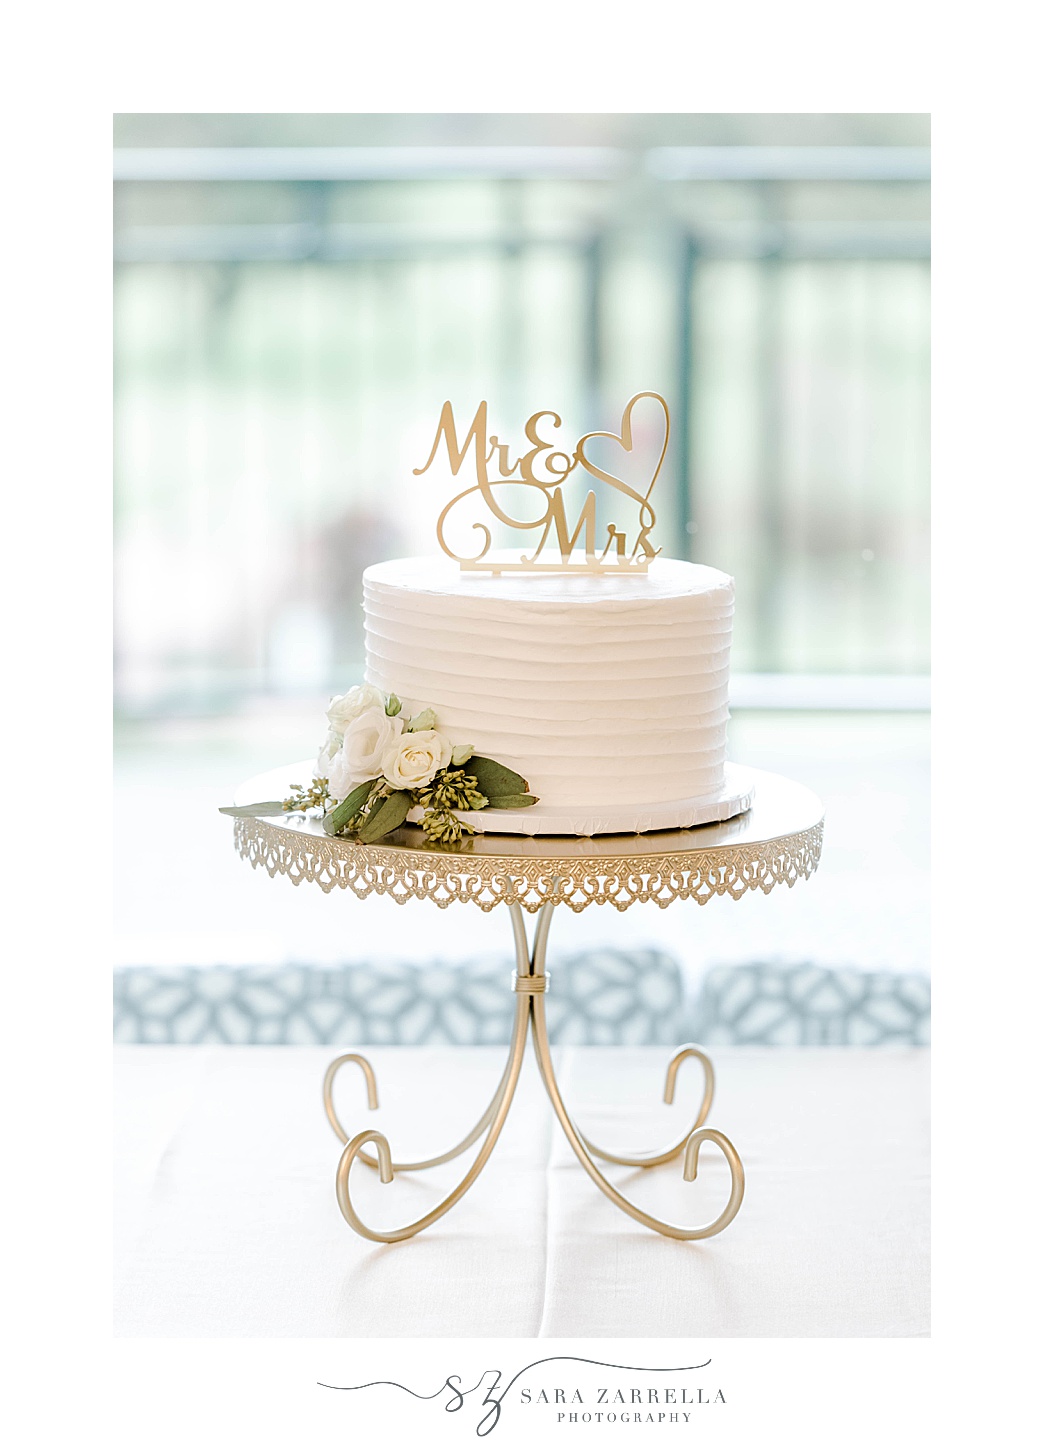 one tier wedding cake with gold mr & mrs topper